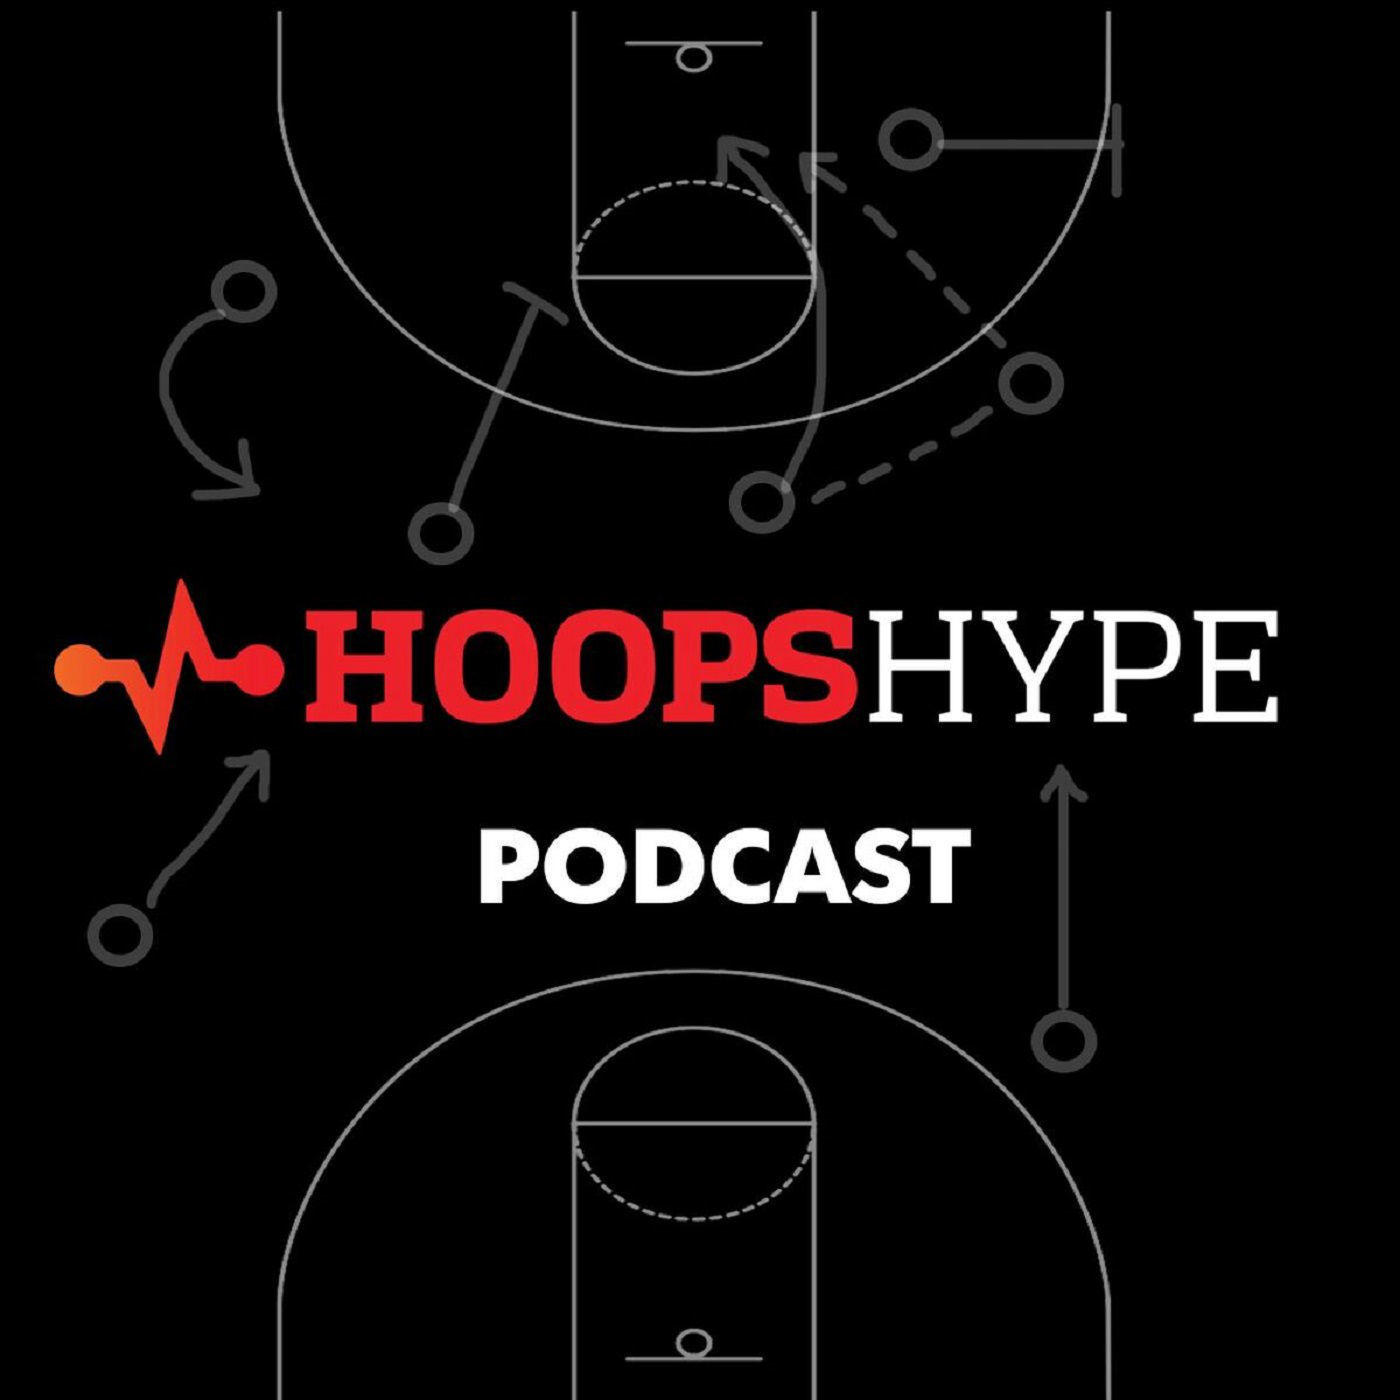 ESPN's Ryan Hollins on His NBA Career, Move to Broadcasting, Polarizing Hot Takes and More (Ep. 197)